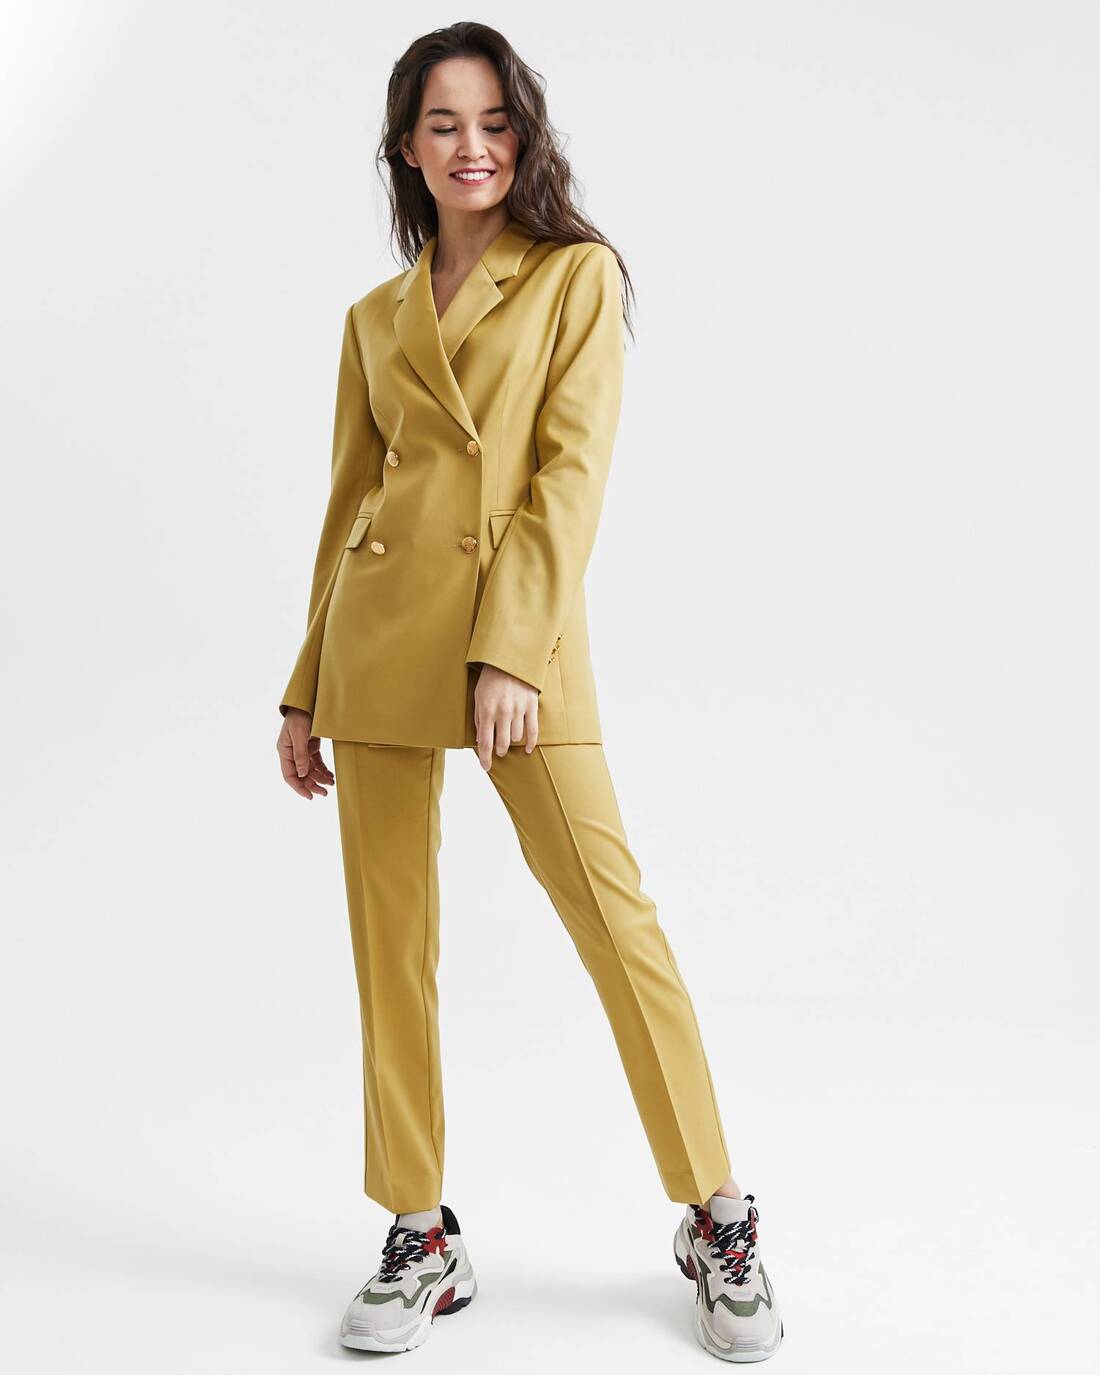 Fitted wool blazer with golden buttons